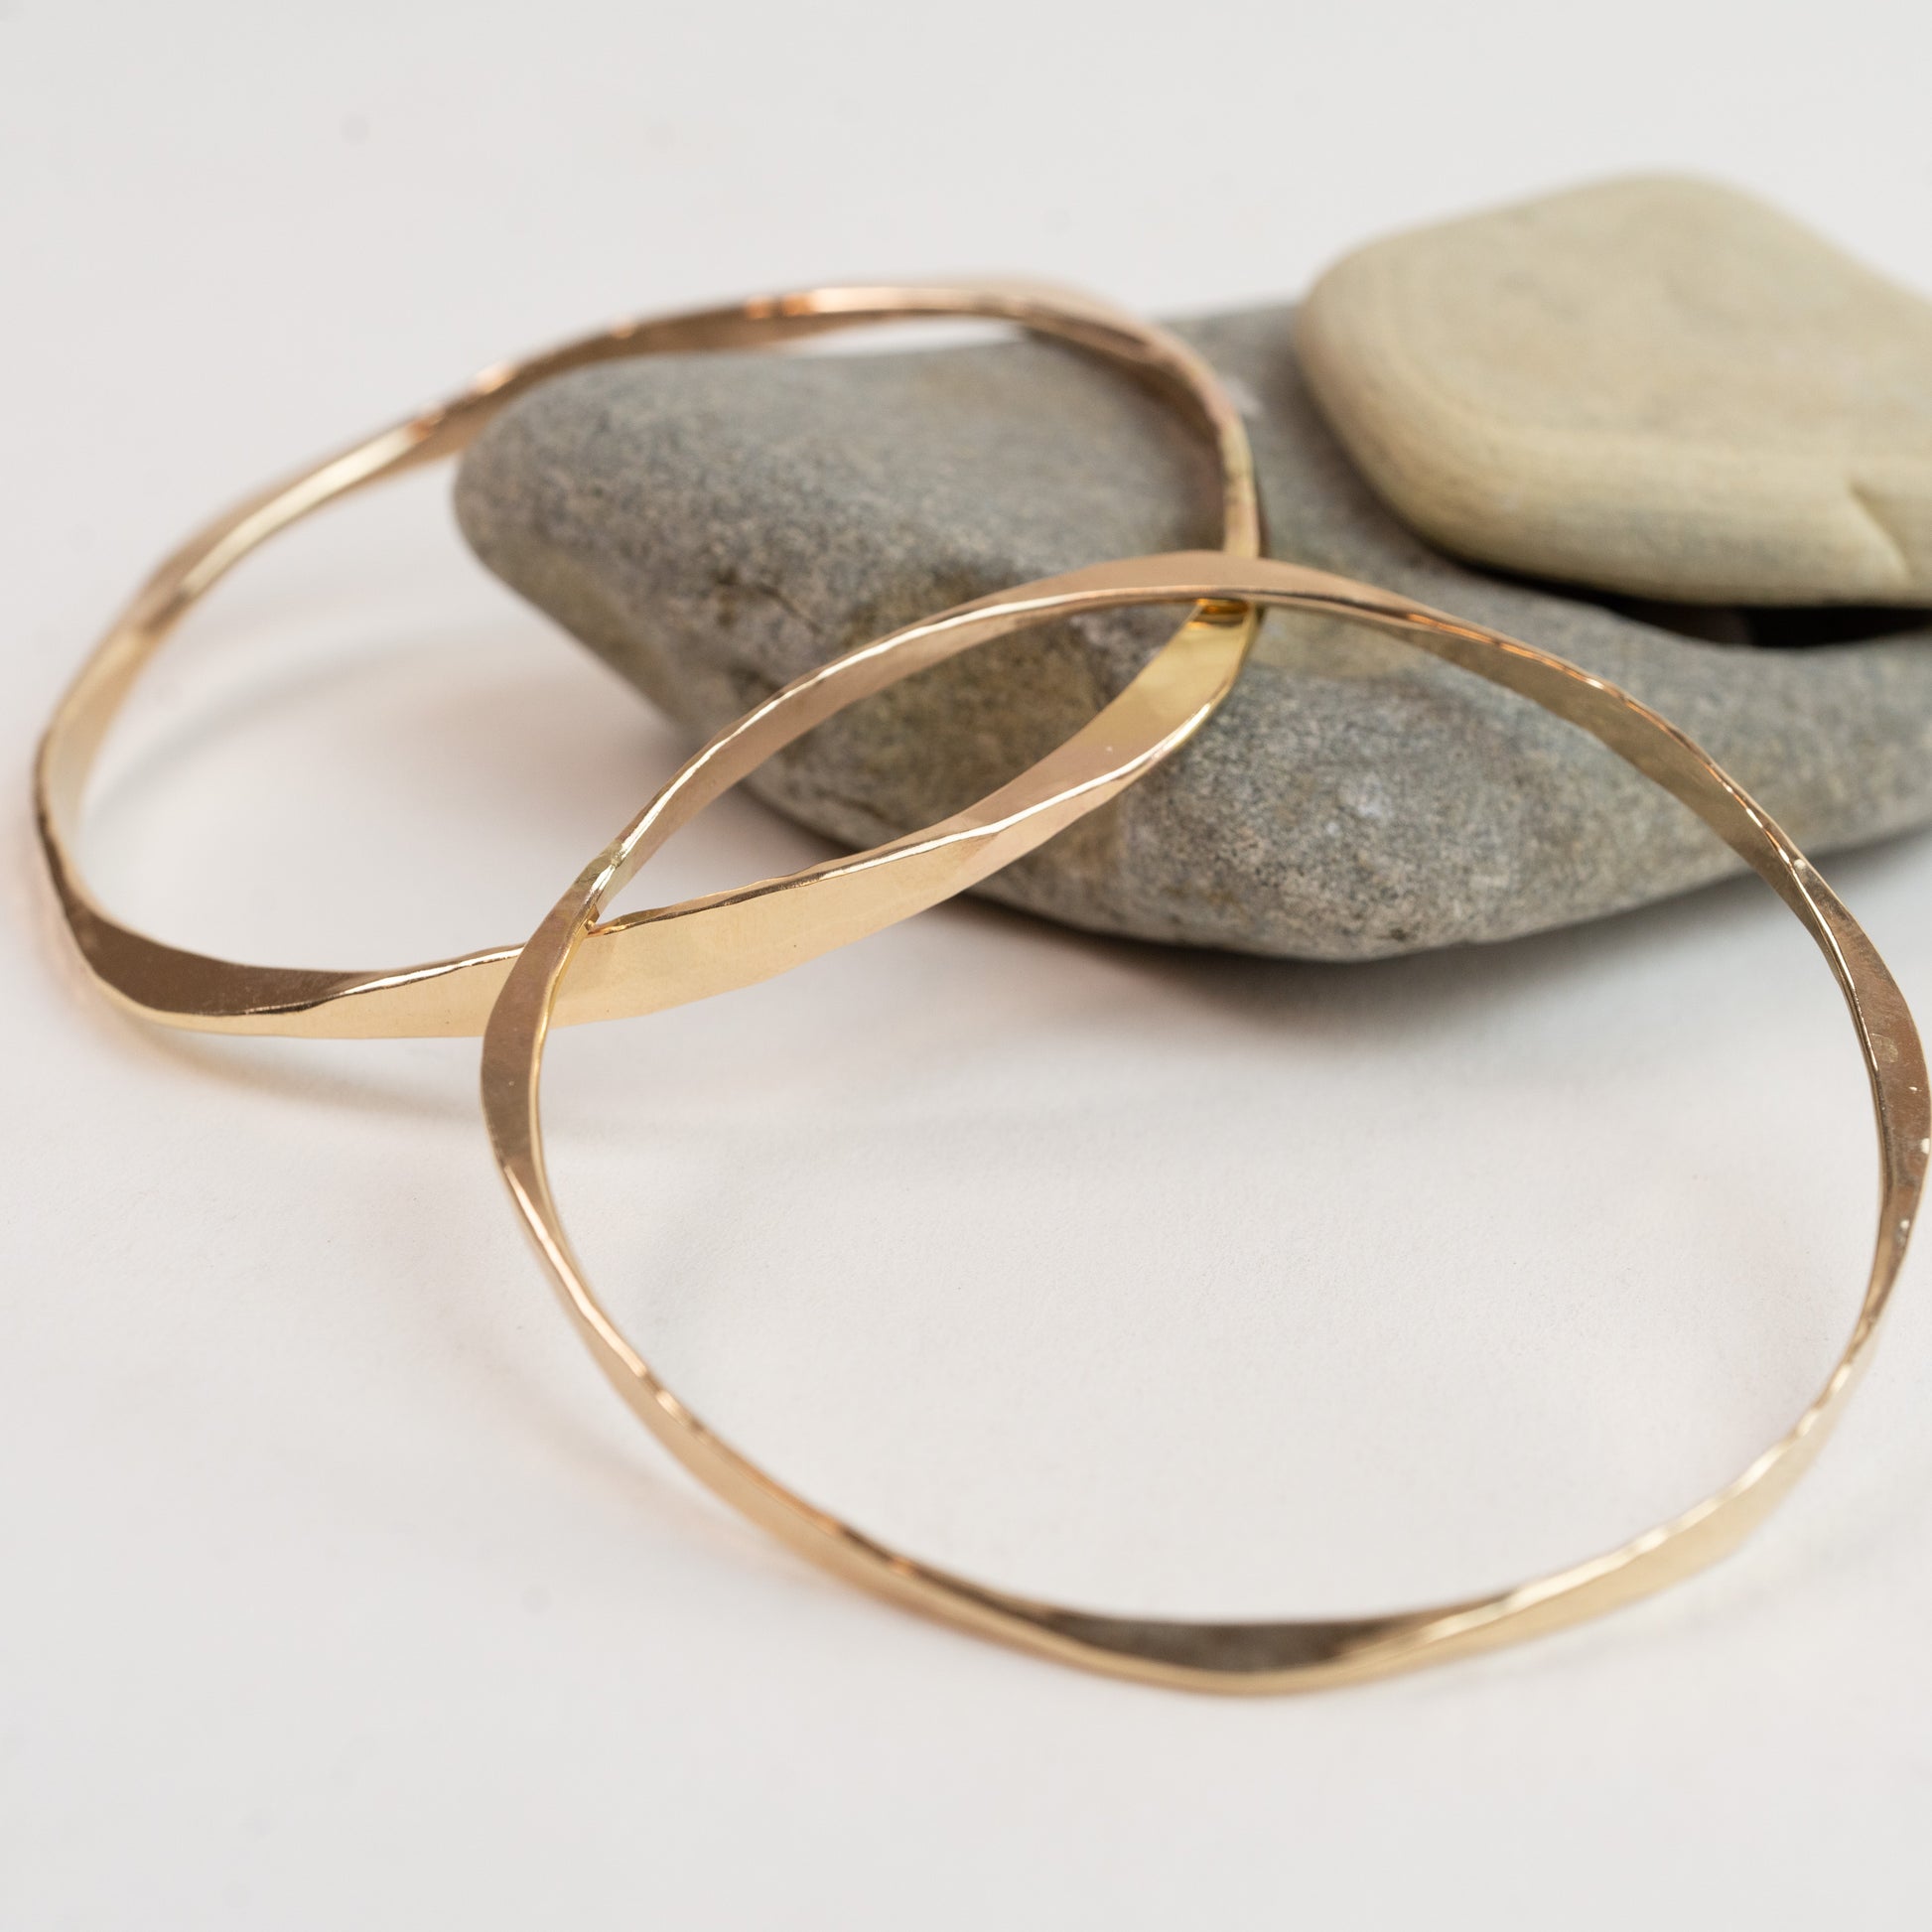 Bangle Bracelets - 14k Solid Yellow Gold - hand forged Four Way - Light 12 gauge and Heavy 8 gauge